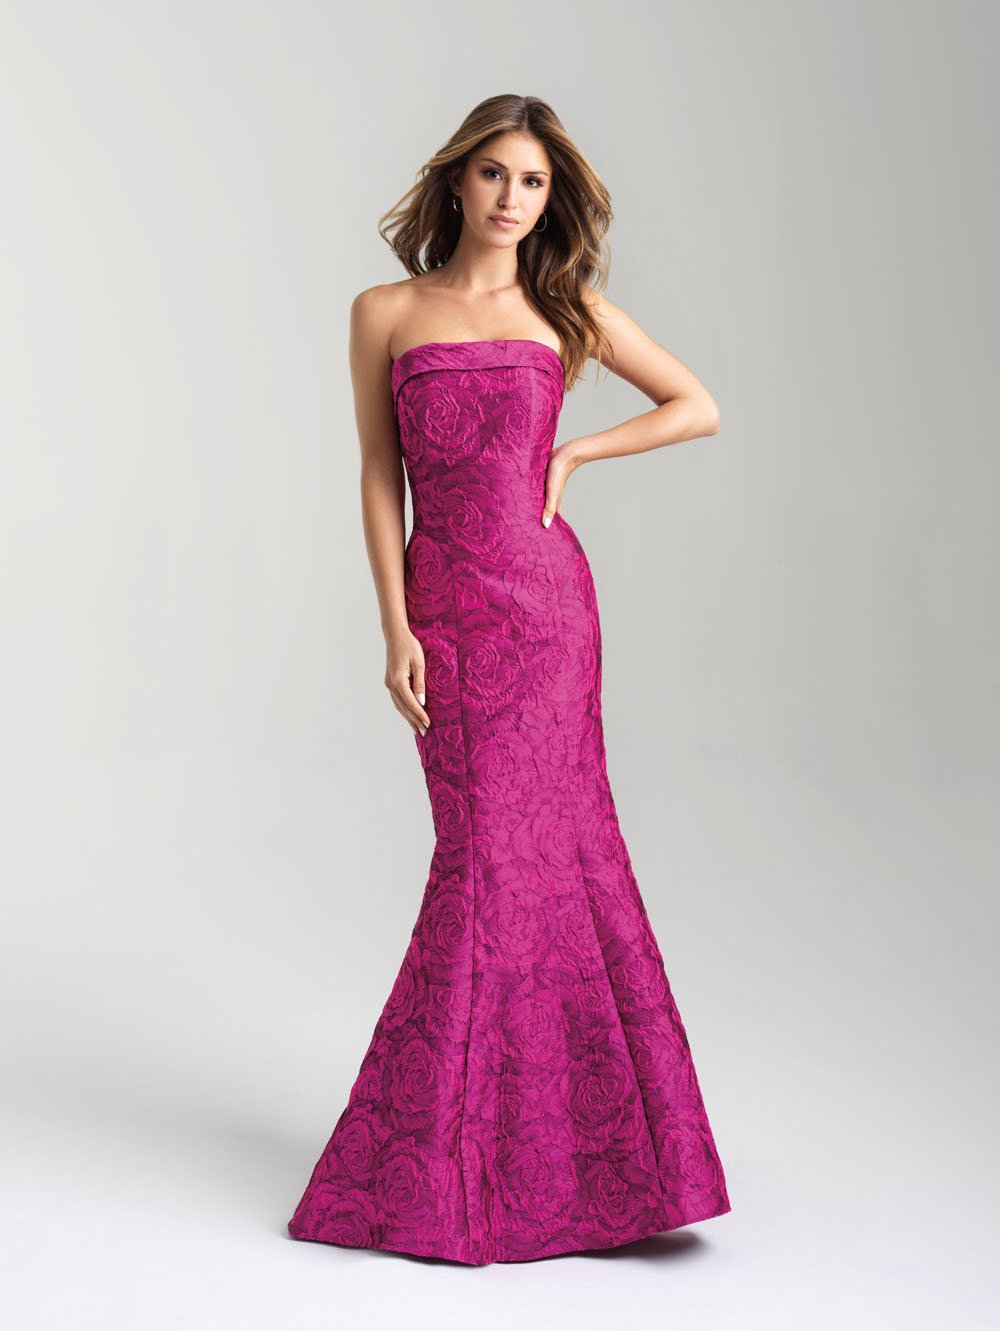 Madison James 20-315 dress images in these colors: Silver, Purple, Fuchsia.